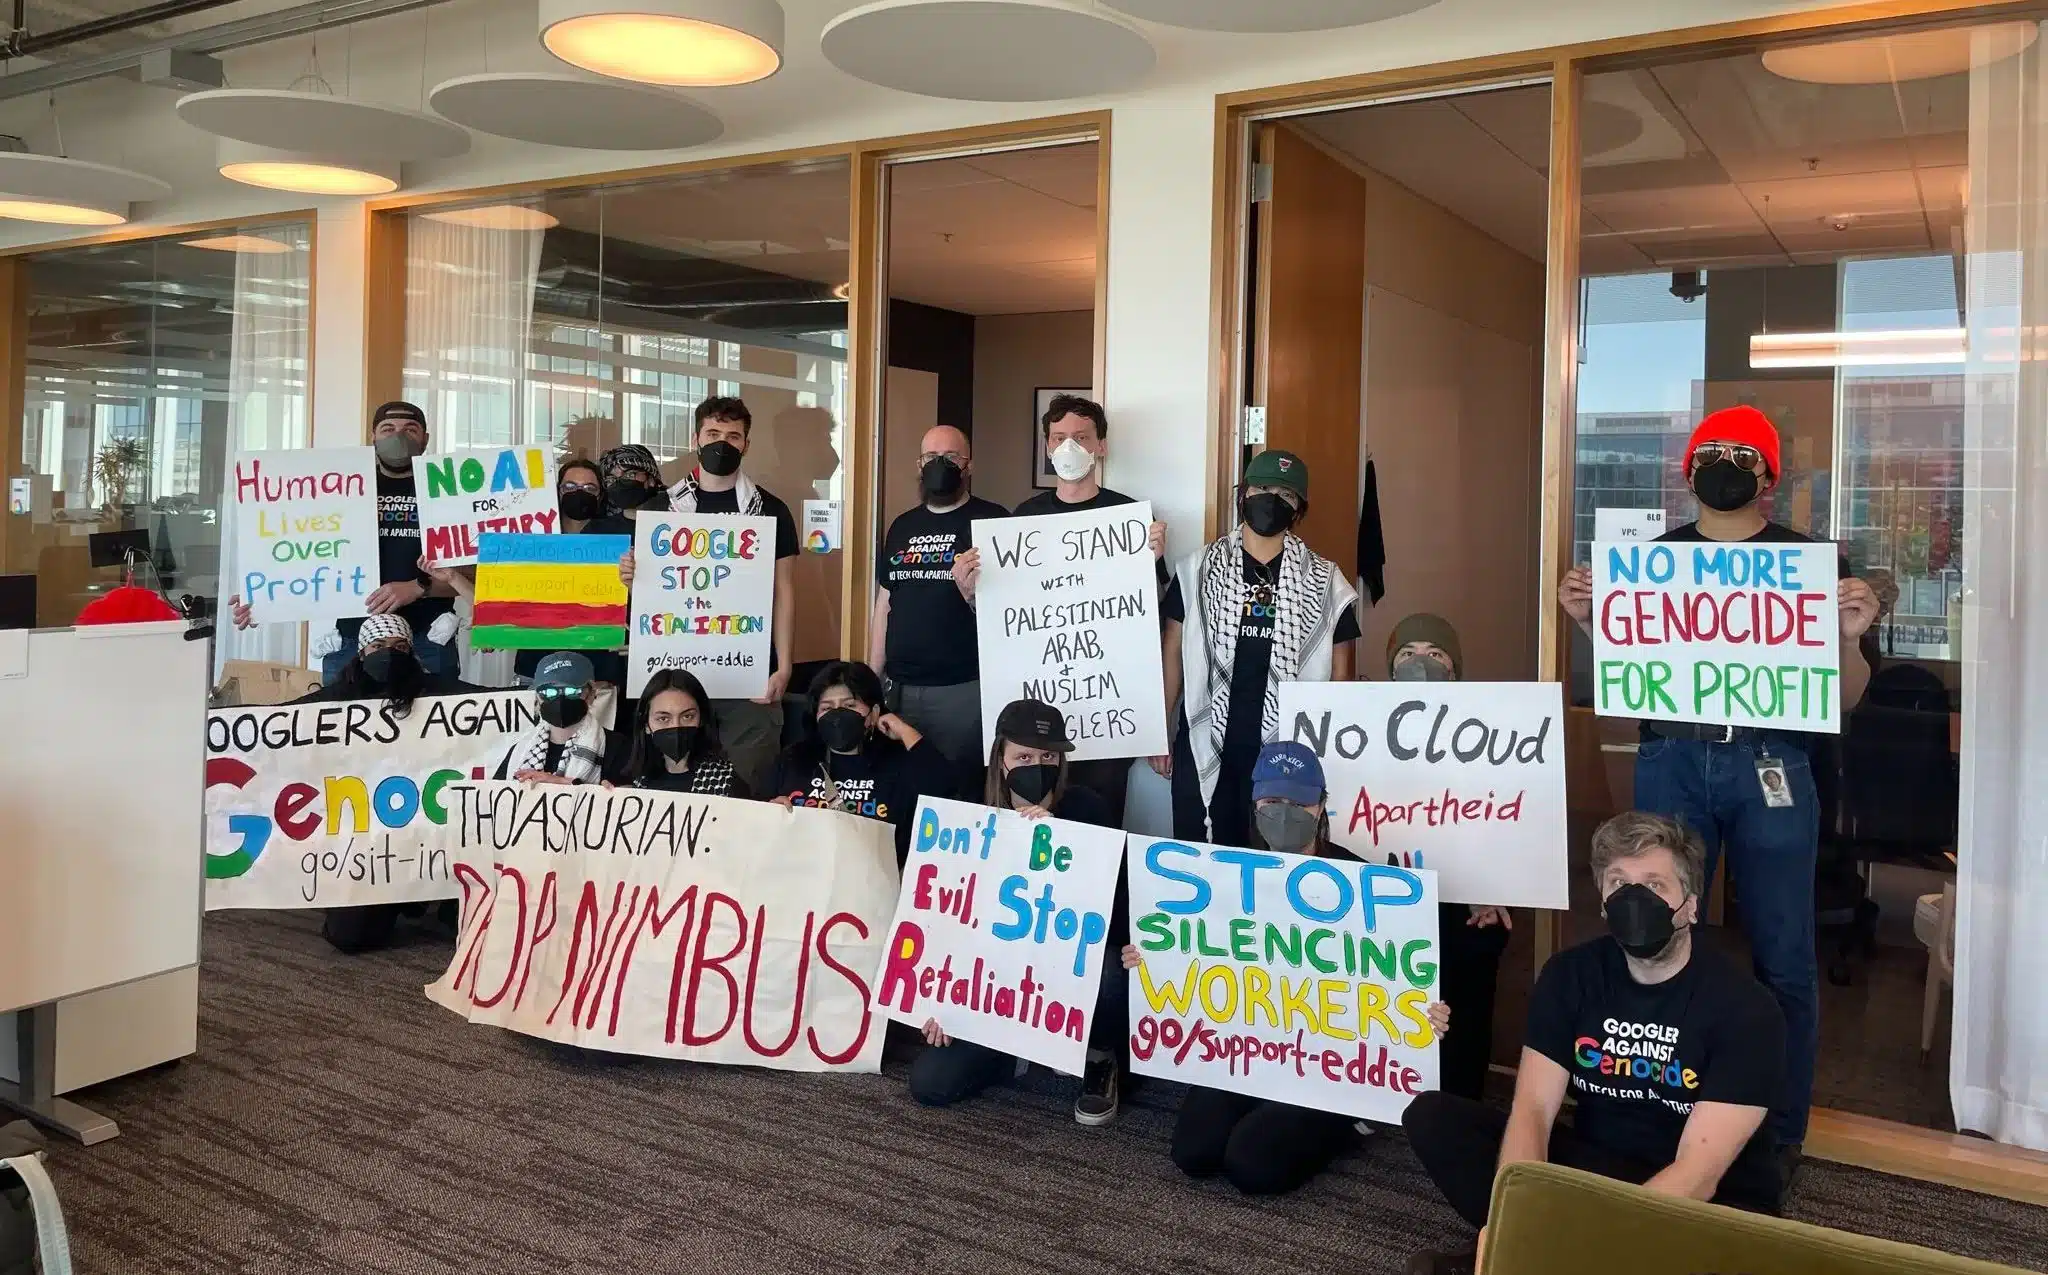 Google employees staging a sit-in against the company's role in providing technology for the Israeli Defense Forces. The company then fired 28 employees.